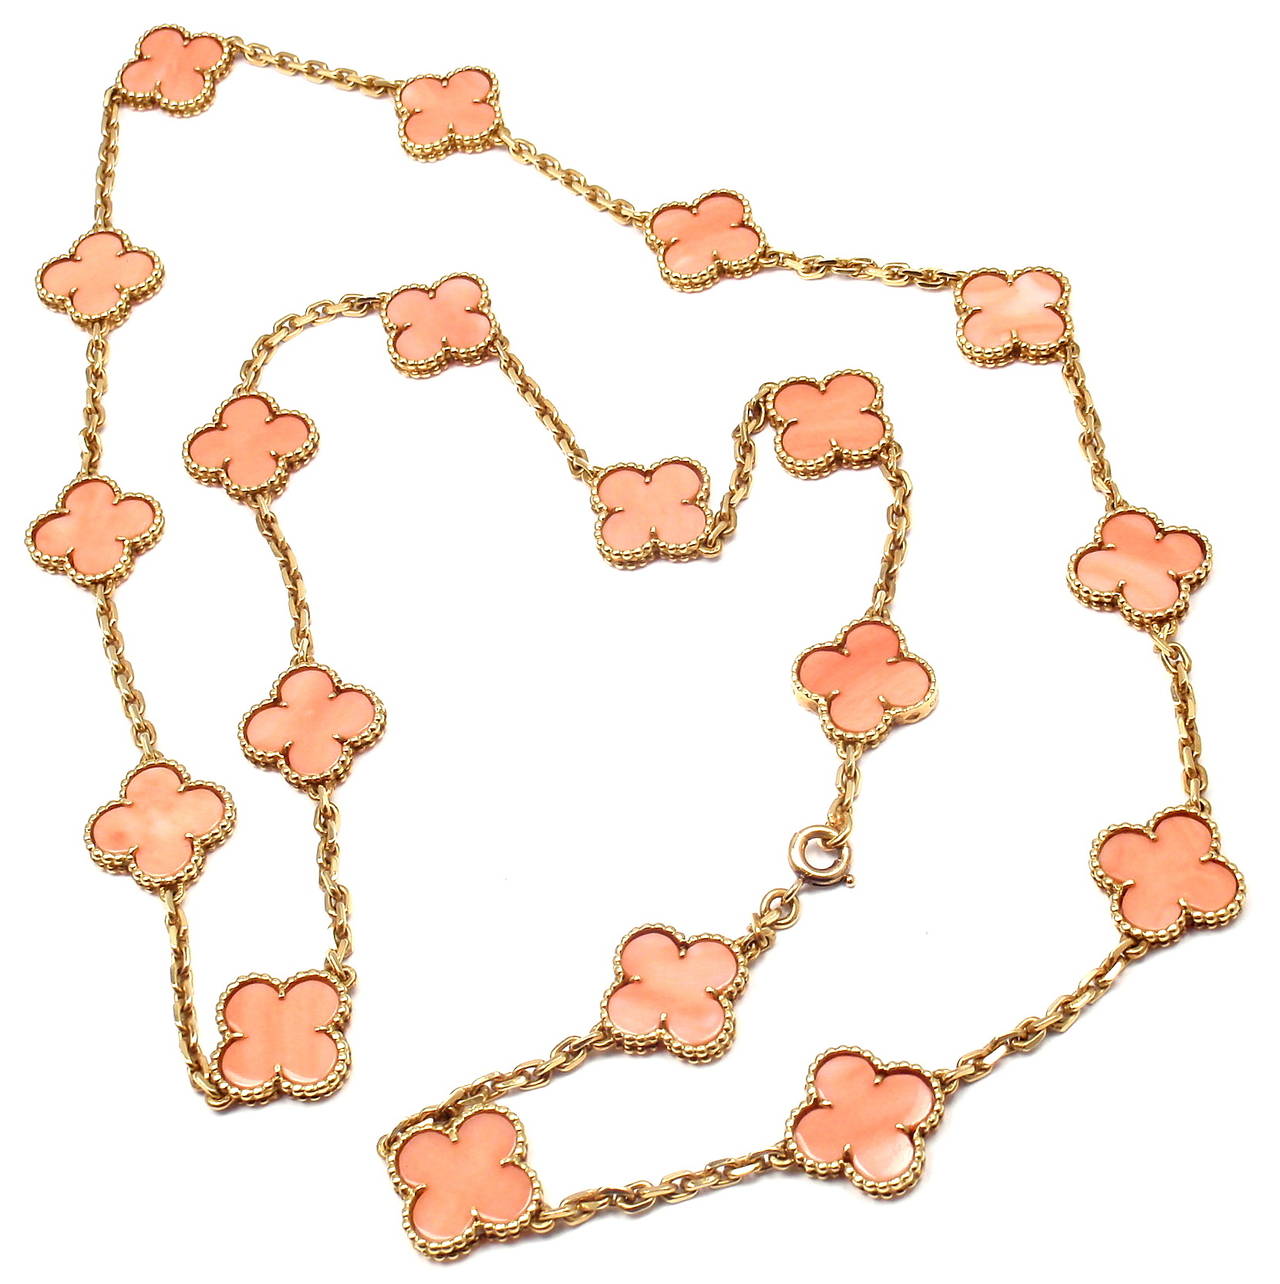 18k Yellow Gold Alhambra 19 Motifs Coral Necklace by Van Cleef & Arpels. 
With 19 motifs of coral alhambra stones 15mm each
This is one of a kind Van Cleef & Arpels antique coral alhambra necklace from 1960's.

Details: 
Length: 29.5